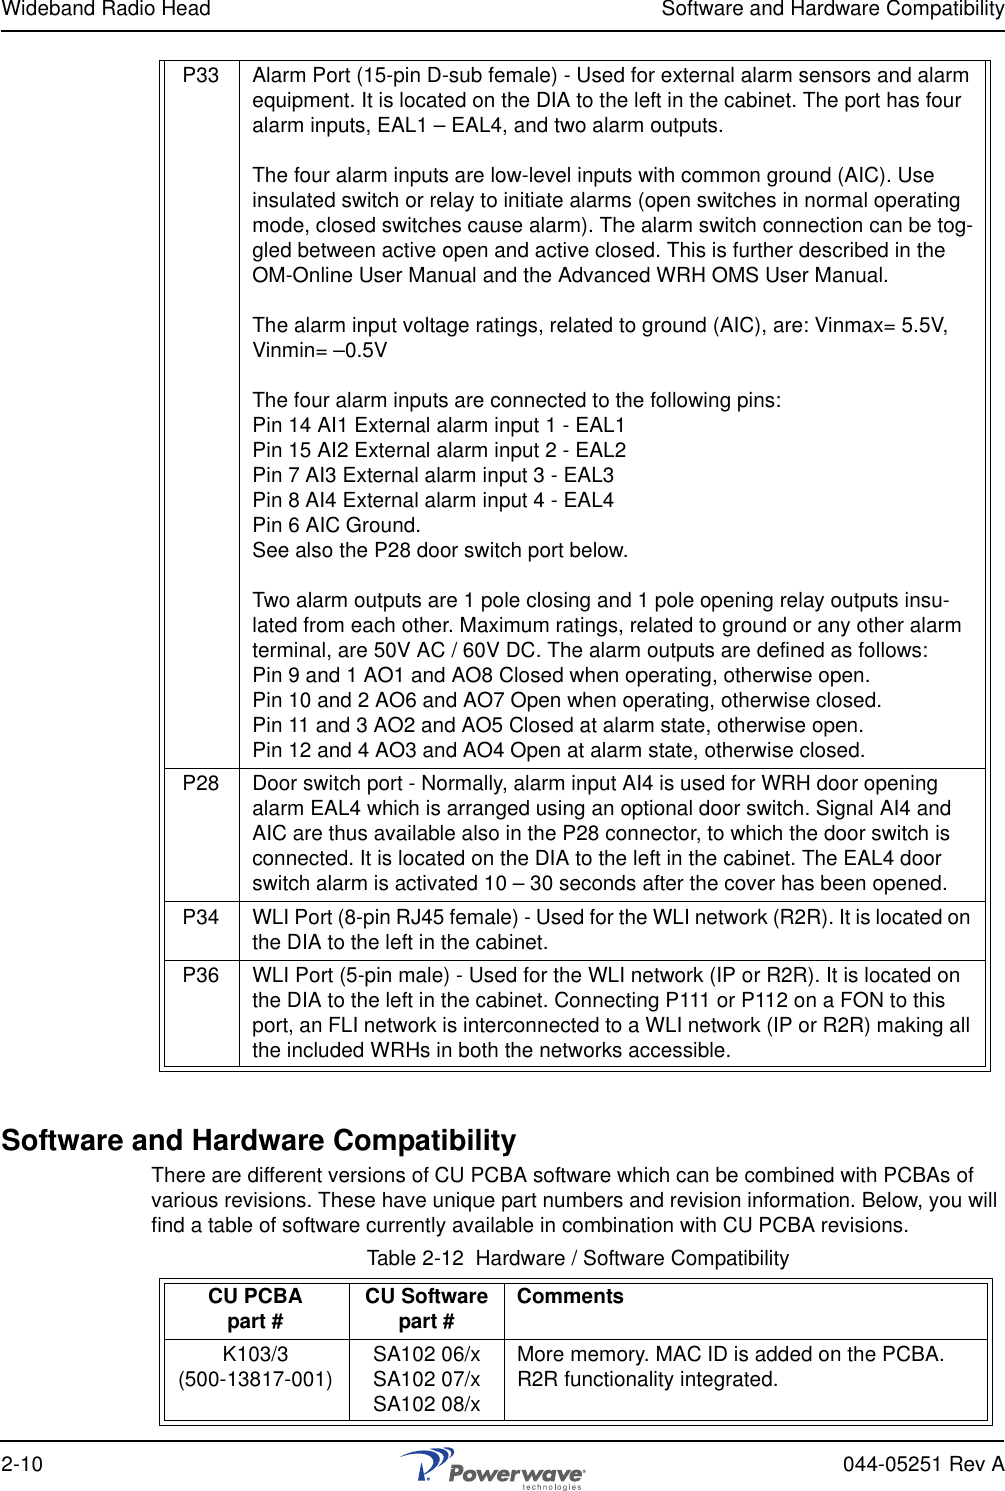 Wideband Radio Head Software and Hardware Compatibility2-10 044-05251 Rev ASoftware and Hardware CompatibilityThere are different versions of CU PCBA software which can be combined with PCBAs of various revisions. These have unique part numbers and revision information. Below, you will find a table of software currently available in combination with CU PCBA revisions.Table 2-12  Hardware / Software CompatibilityP33 Alarm Port (15-pin D-sub female) - Used for external alarm sensors and alarm equipment. It is located on the DIA to the left in the cabinet. The port has four alarm inputs, EAL1 – EAL4, and two alarm outputs.The four alarm inputs are low-level inputs with common ground (AIC). Use insulated switch or relay to initiate alarms (open switches in normal operating mode, closed switches cause alarm). The alarm switch connection can be tog-gled between active open and active closed. This is further described in the OM-Online User Manual and the Advanced WRH OMS User Manual.The alarm input voltage ratings, related to ground (AIC), are: Vinmax= 5.5V, Vinmin= –0.5V The four alarm inputs are connected to the following pins:Pin 14 AI1 External alarm input 1 - EAL1Pin 15 AI2 External alarm input 2 - EAL2Pin 7 AI3 External alarm input 3 - EAL3Pin 8 AI4 External alarm input 4 - EAL4Pin 6 AIC Ground.See also the P28 door switch port below.Two alarm outputs are 1 pole closing and 1 pole opening relay outputs insu-lated from each other. Maximum ratings, related to ground or any other alarm terminal, are 50V AC / 60V DC. The alarm outputs are defined as follows:Pin 9 and 1 AO1 and AO8 Closed when operating, otherwise open. Pin 10 and 2 AO6 and AO7 Open when operating, otherwise closed. Pin 11 and 3 AO2 and AO5 Closed at alarm state, otherwise open. Pin 12 and 4 AO3 and AO4 Open at alarm state, otherwise closed.P28 Door switch port - Normally, alarm input AI4 is used for WRH door opening alarm EAL4 which is arranged using an optional door switch. Signal AI4 and AIC are thus available also in the P28 connector, to which the door switch is connected. It is located on the DIA to the left in the cabinet. The EAL4 door switch alarm is activated 10 – 30 seconds after the cover has been opened.P34 WLI Port (8-pin RJ45 female) - Used for the WLI network (R2R). It is located on the DIA to the left in the cabinet.P36 WLI Port (5-pin male) - Used for the WLI network (IP or R2R). It is located on the DIA to the left in the cabinet. Connecting P111 or P112 on a FON to this port, an FLI network is interconnected to a WLI network (IP or R2R) making all the included WRHs in both the networks accessible.CU PCBApart # CU Softwarepart # CommentsK103/3(500-13817-001) SA102 06/x SA102 07/x SA102 08/xMore memory. MAC ID is added on the PCBA. R2R functionality integrated.